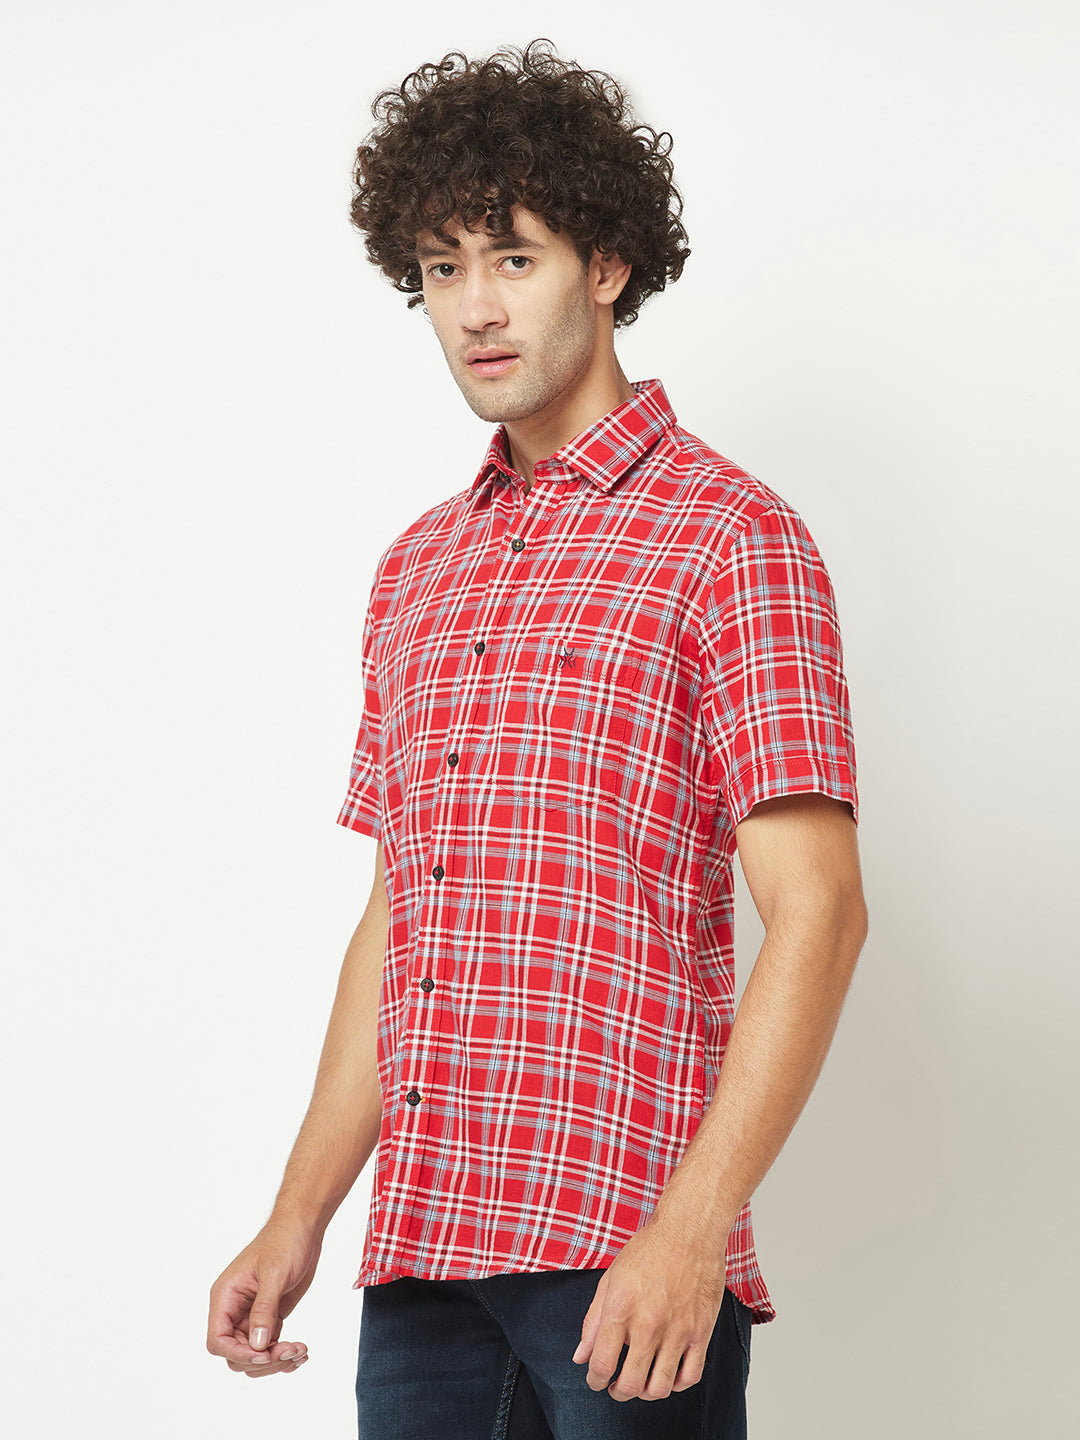  Red Short-Sleeved Flannel Shirt 